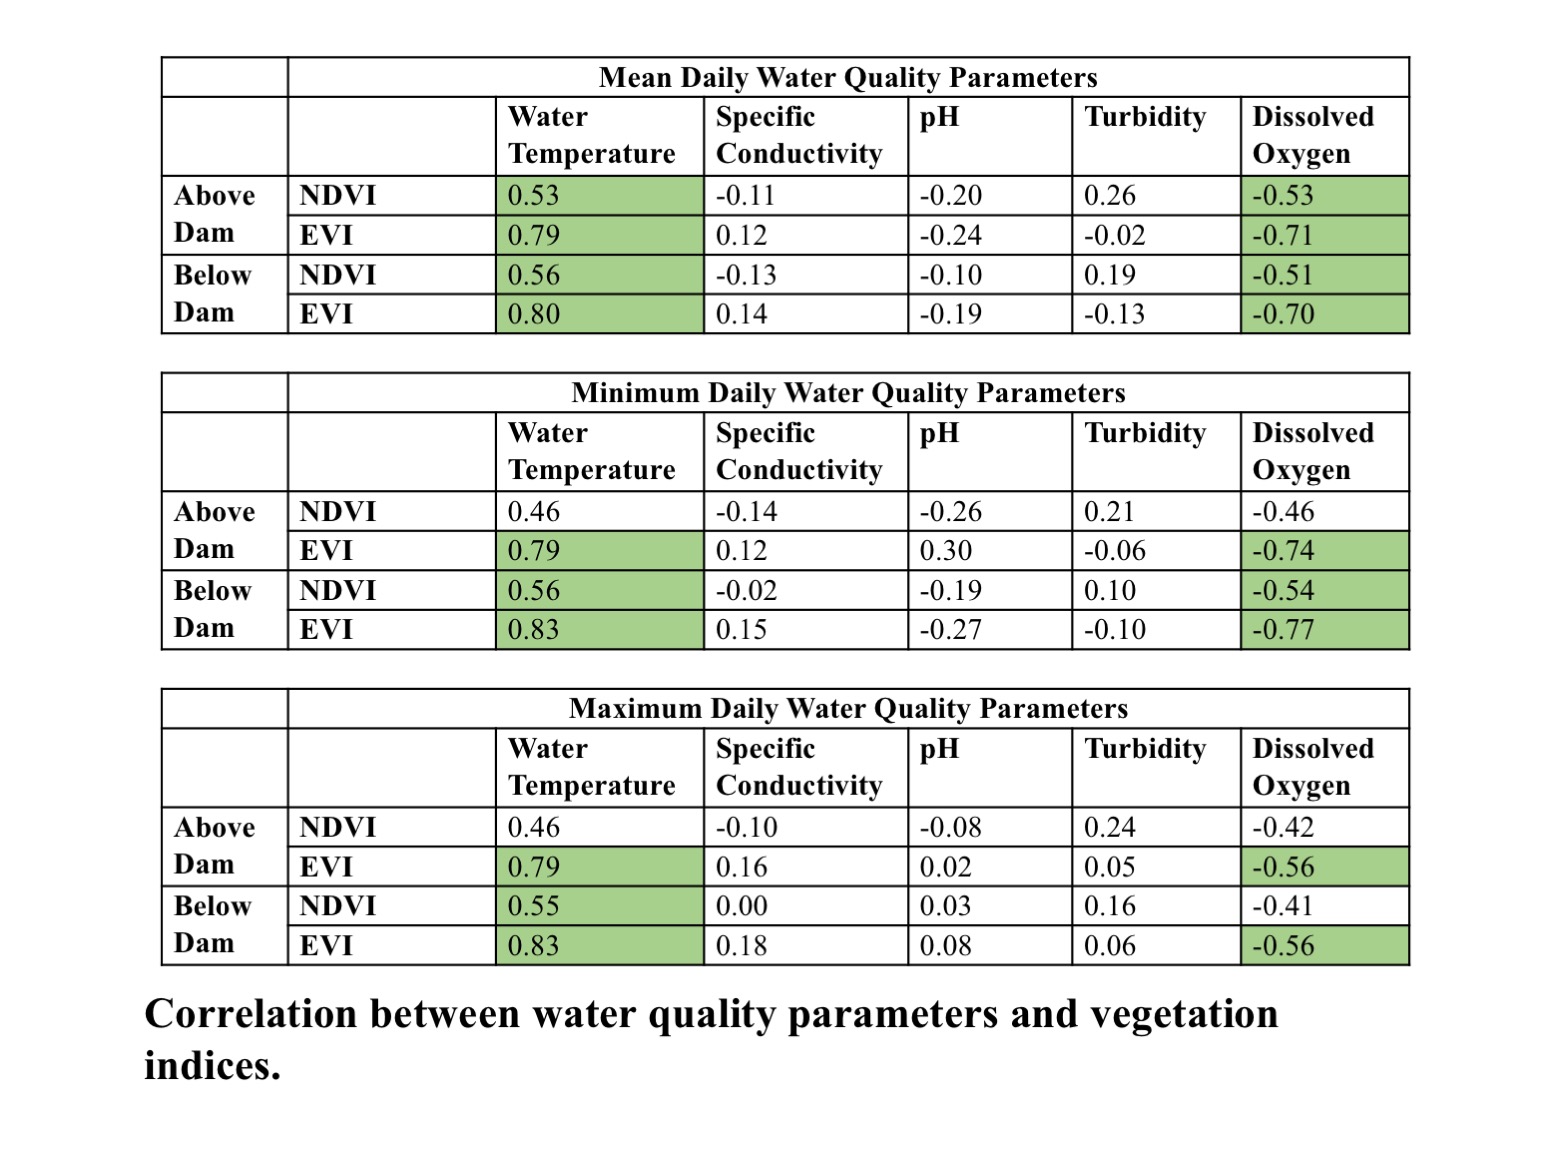 correlation between water quality parameters and vegetation